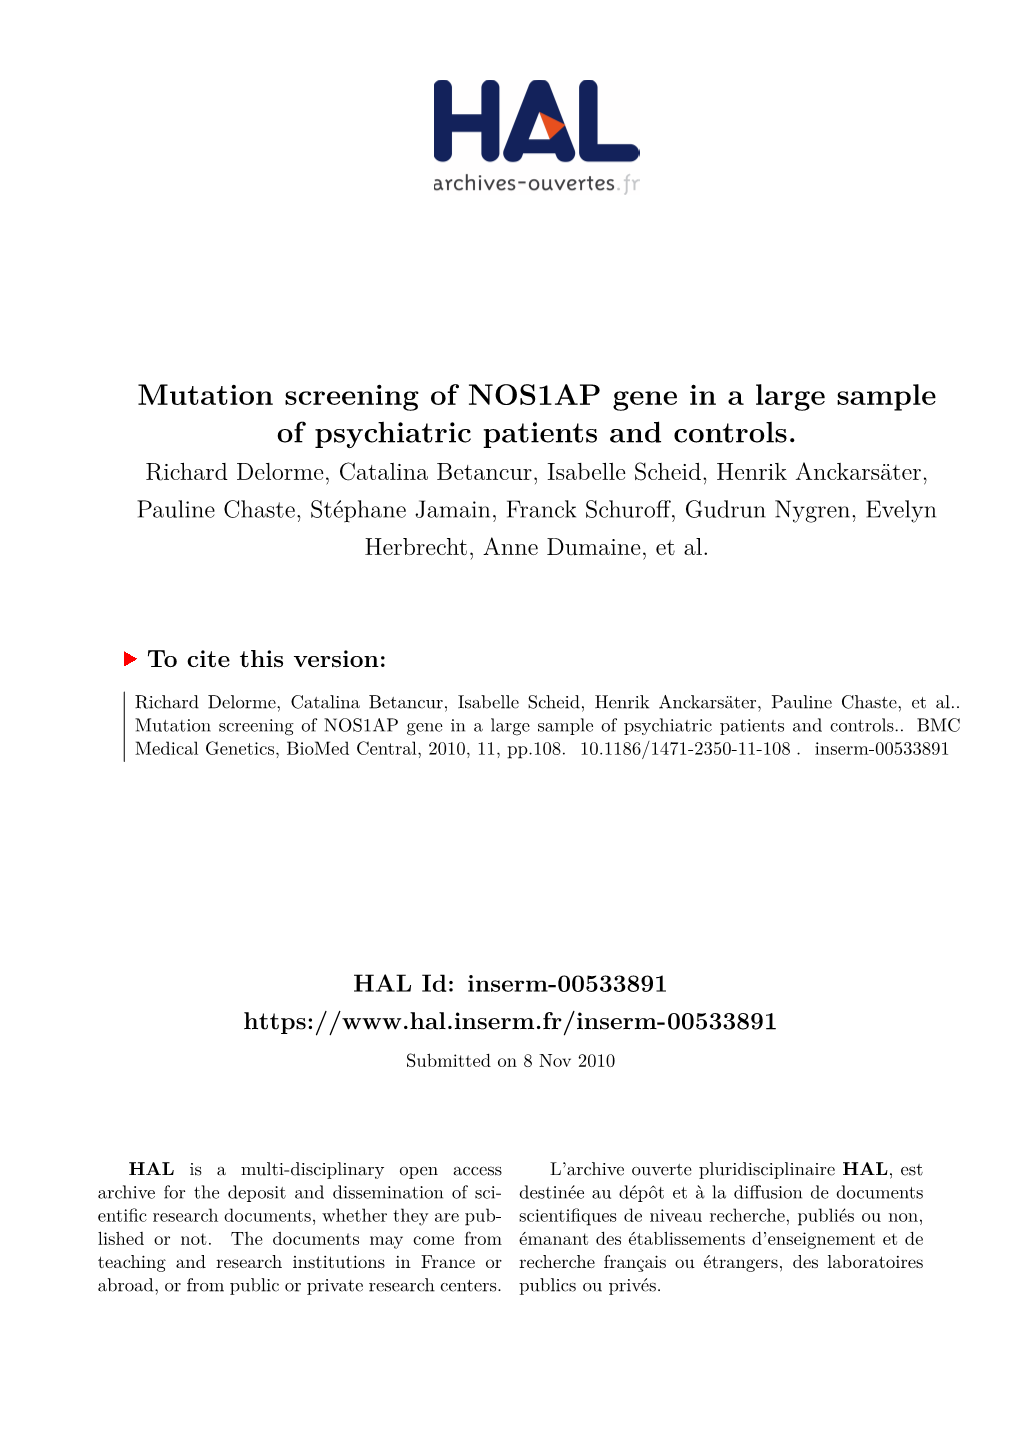 Mutation Screening of NOS1AP Gene in a Large Sample of Psychiatric Patients and Controls